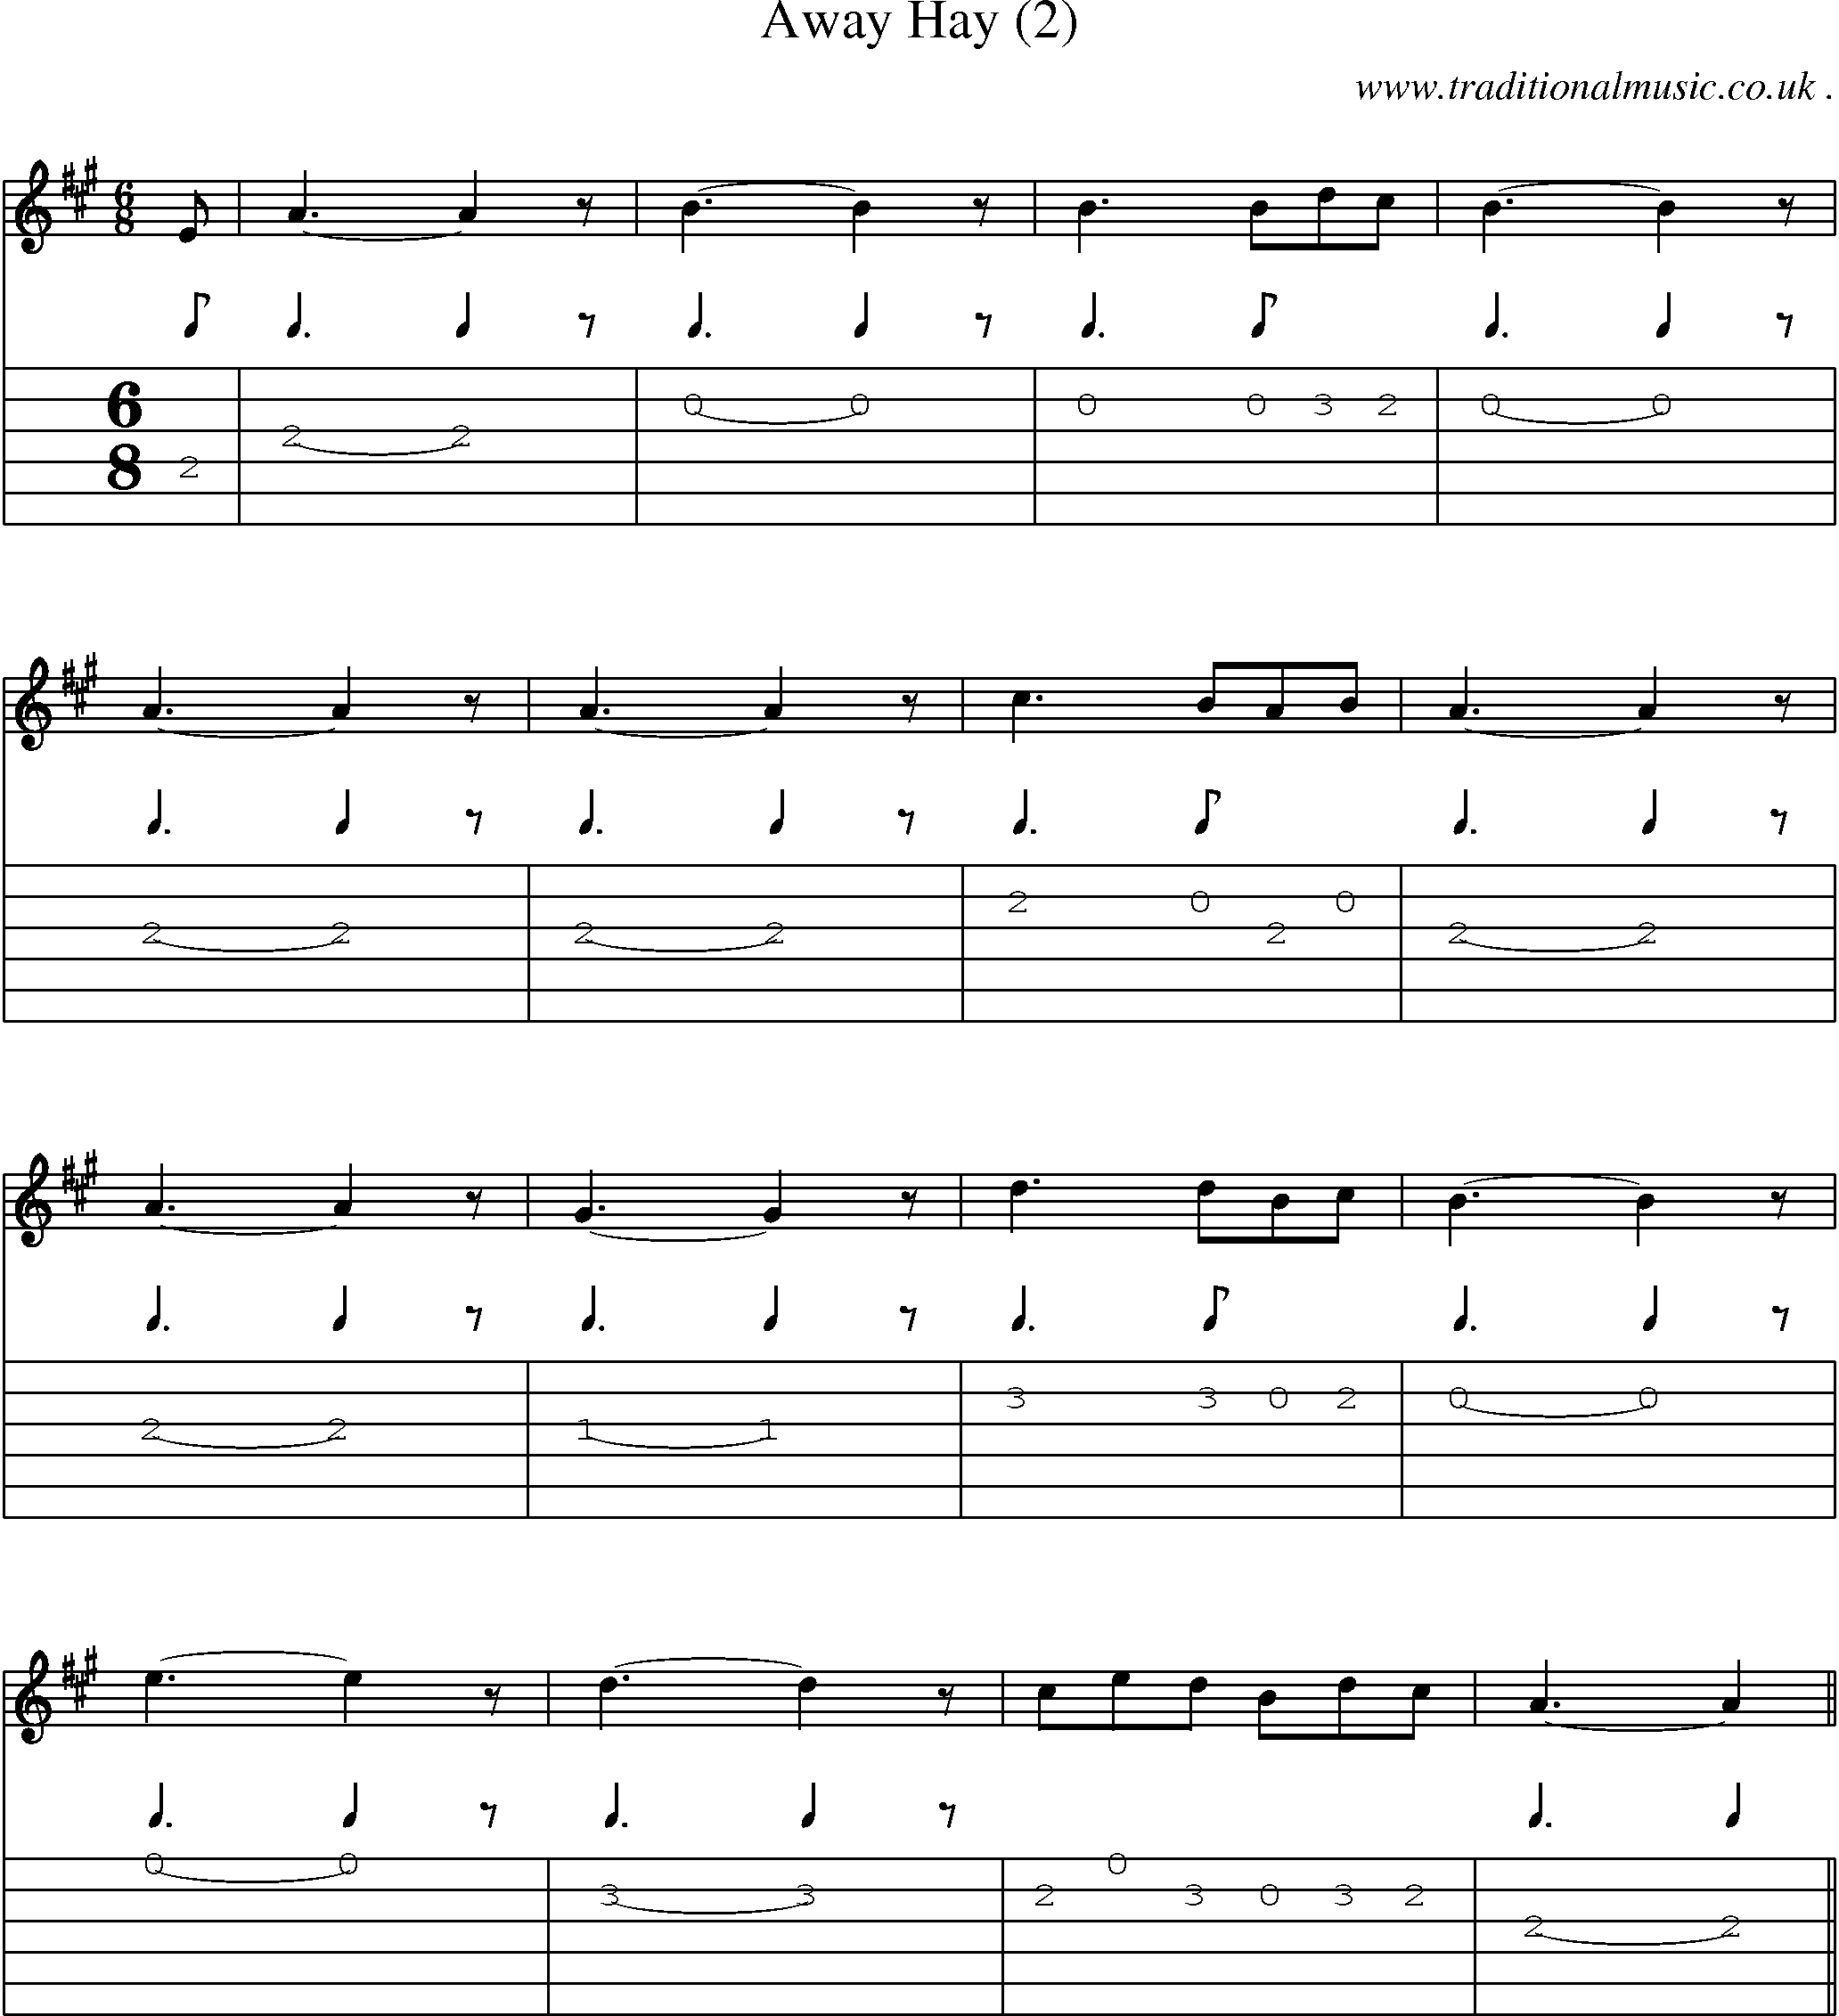 Sheet-Music and Guitar Tabs for Away Hay (2)